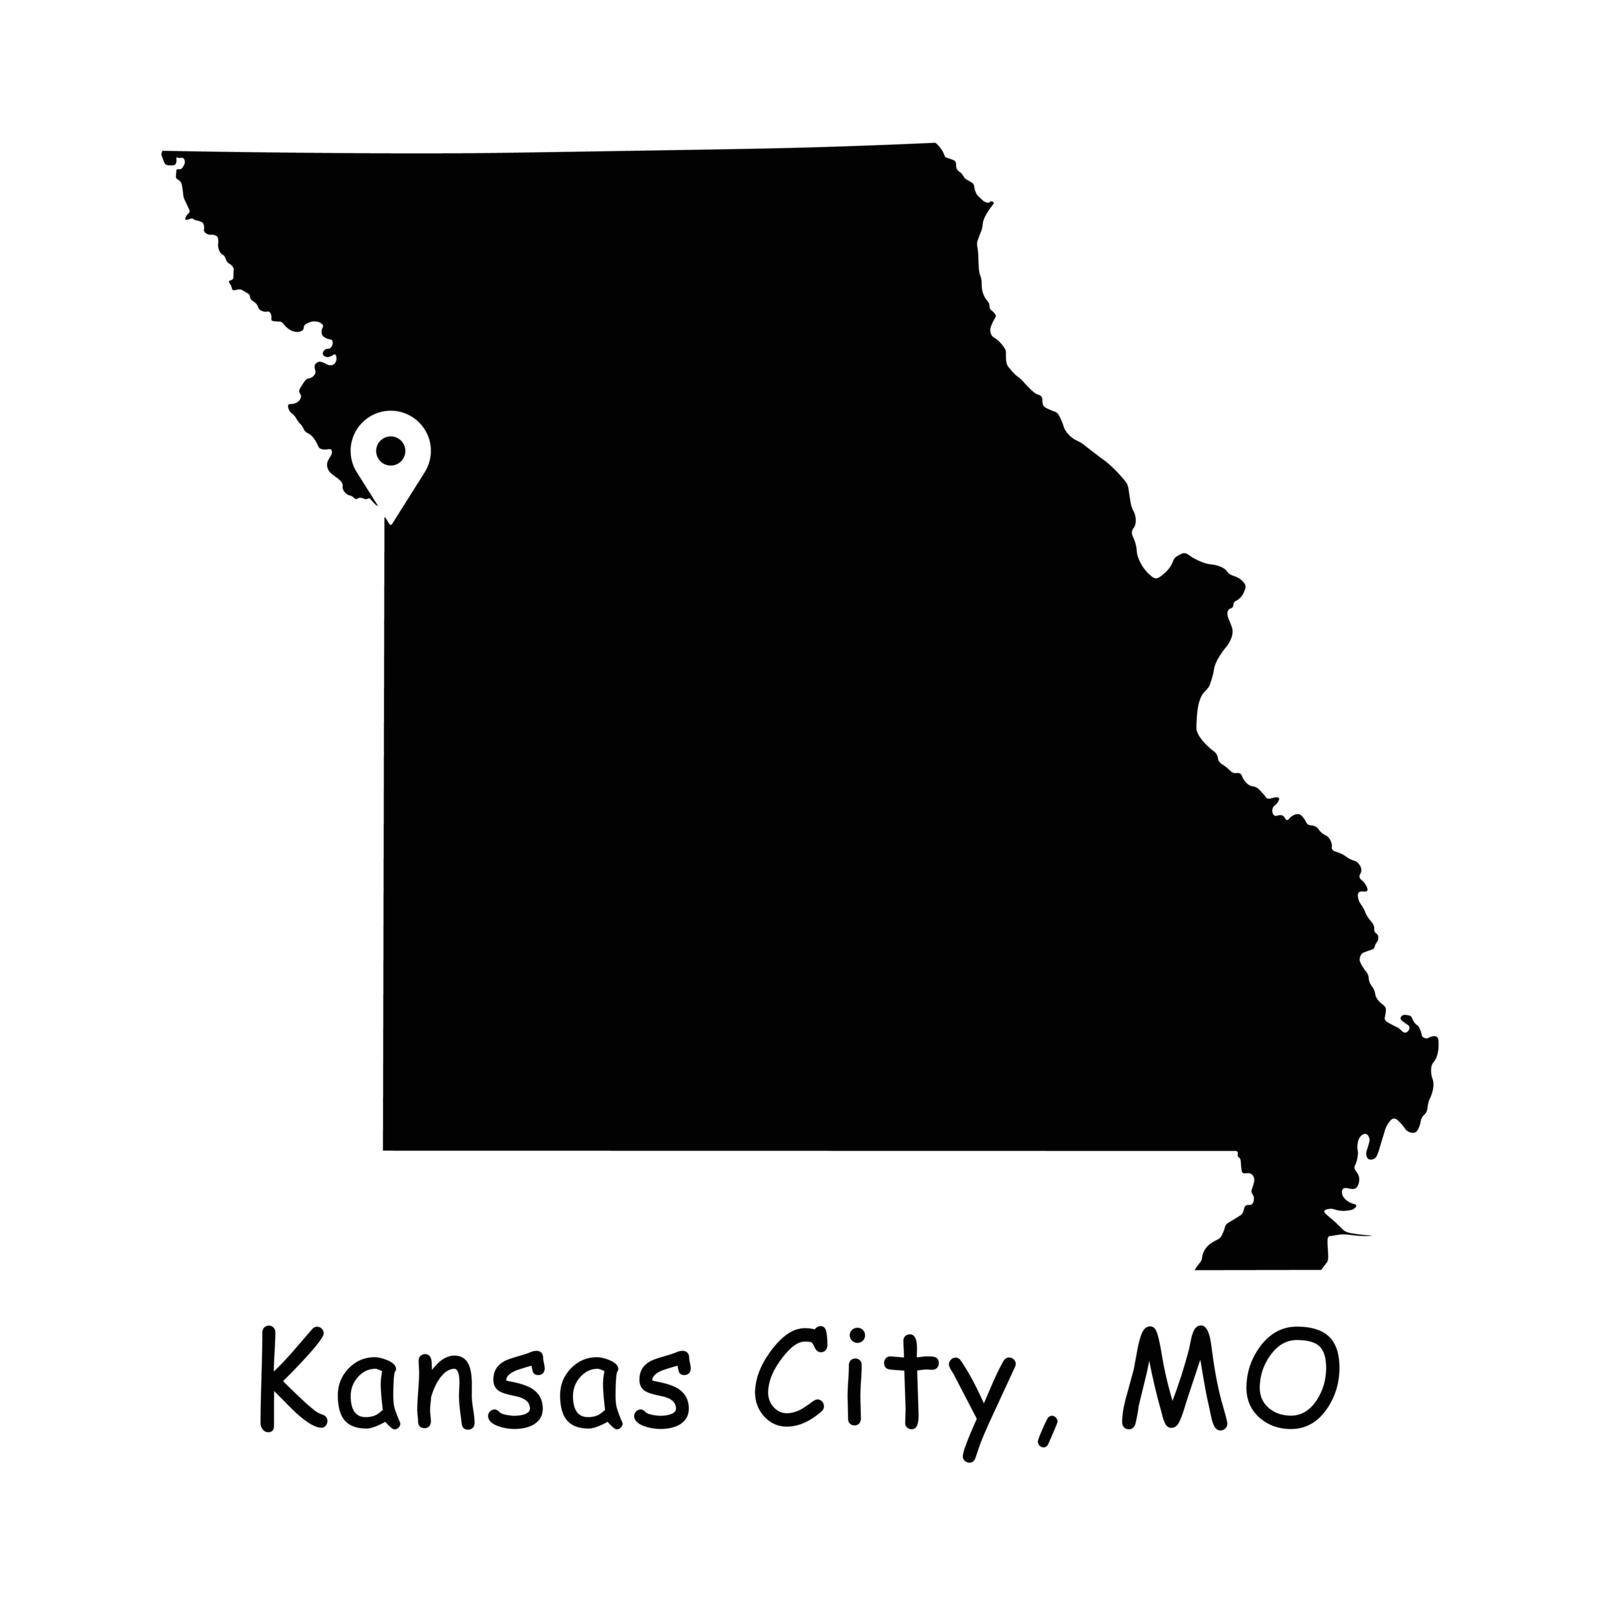 Kansas City on Missouri State Map. Detailed MO State Map with Location Pin on Kansas City. Black silhouette vector map isolated on white background.